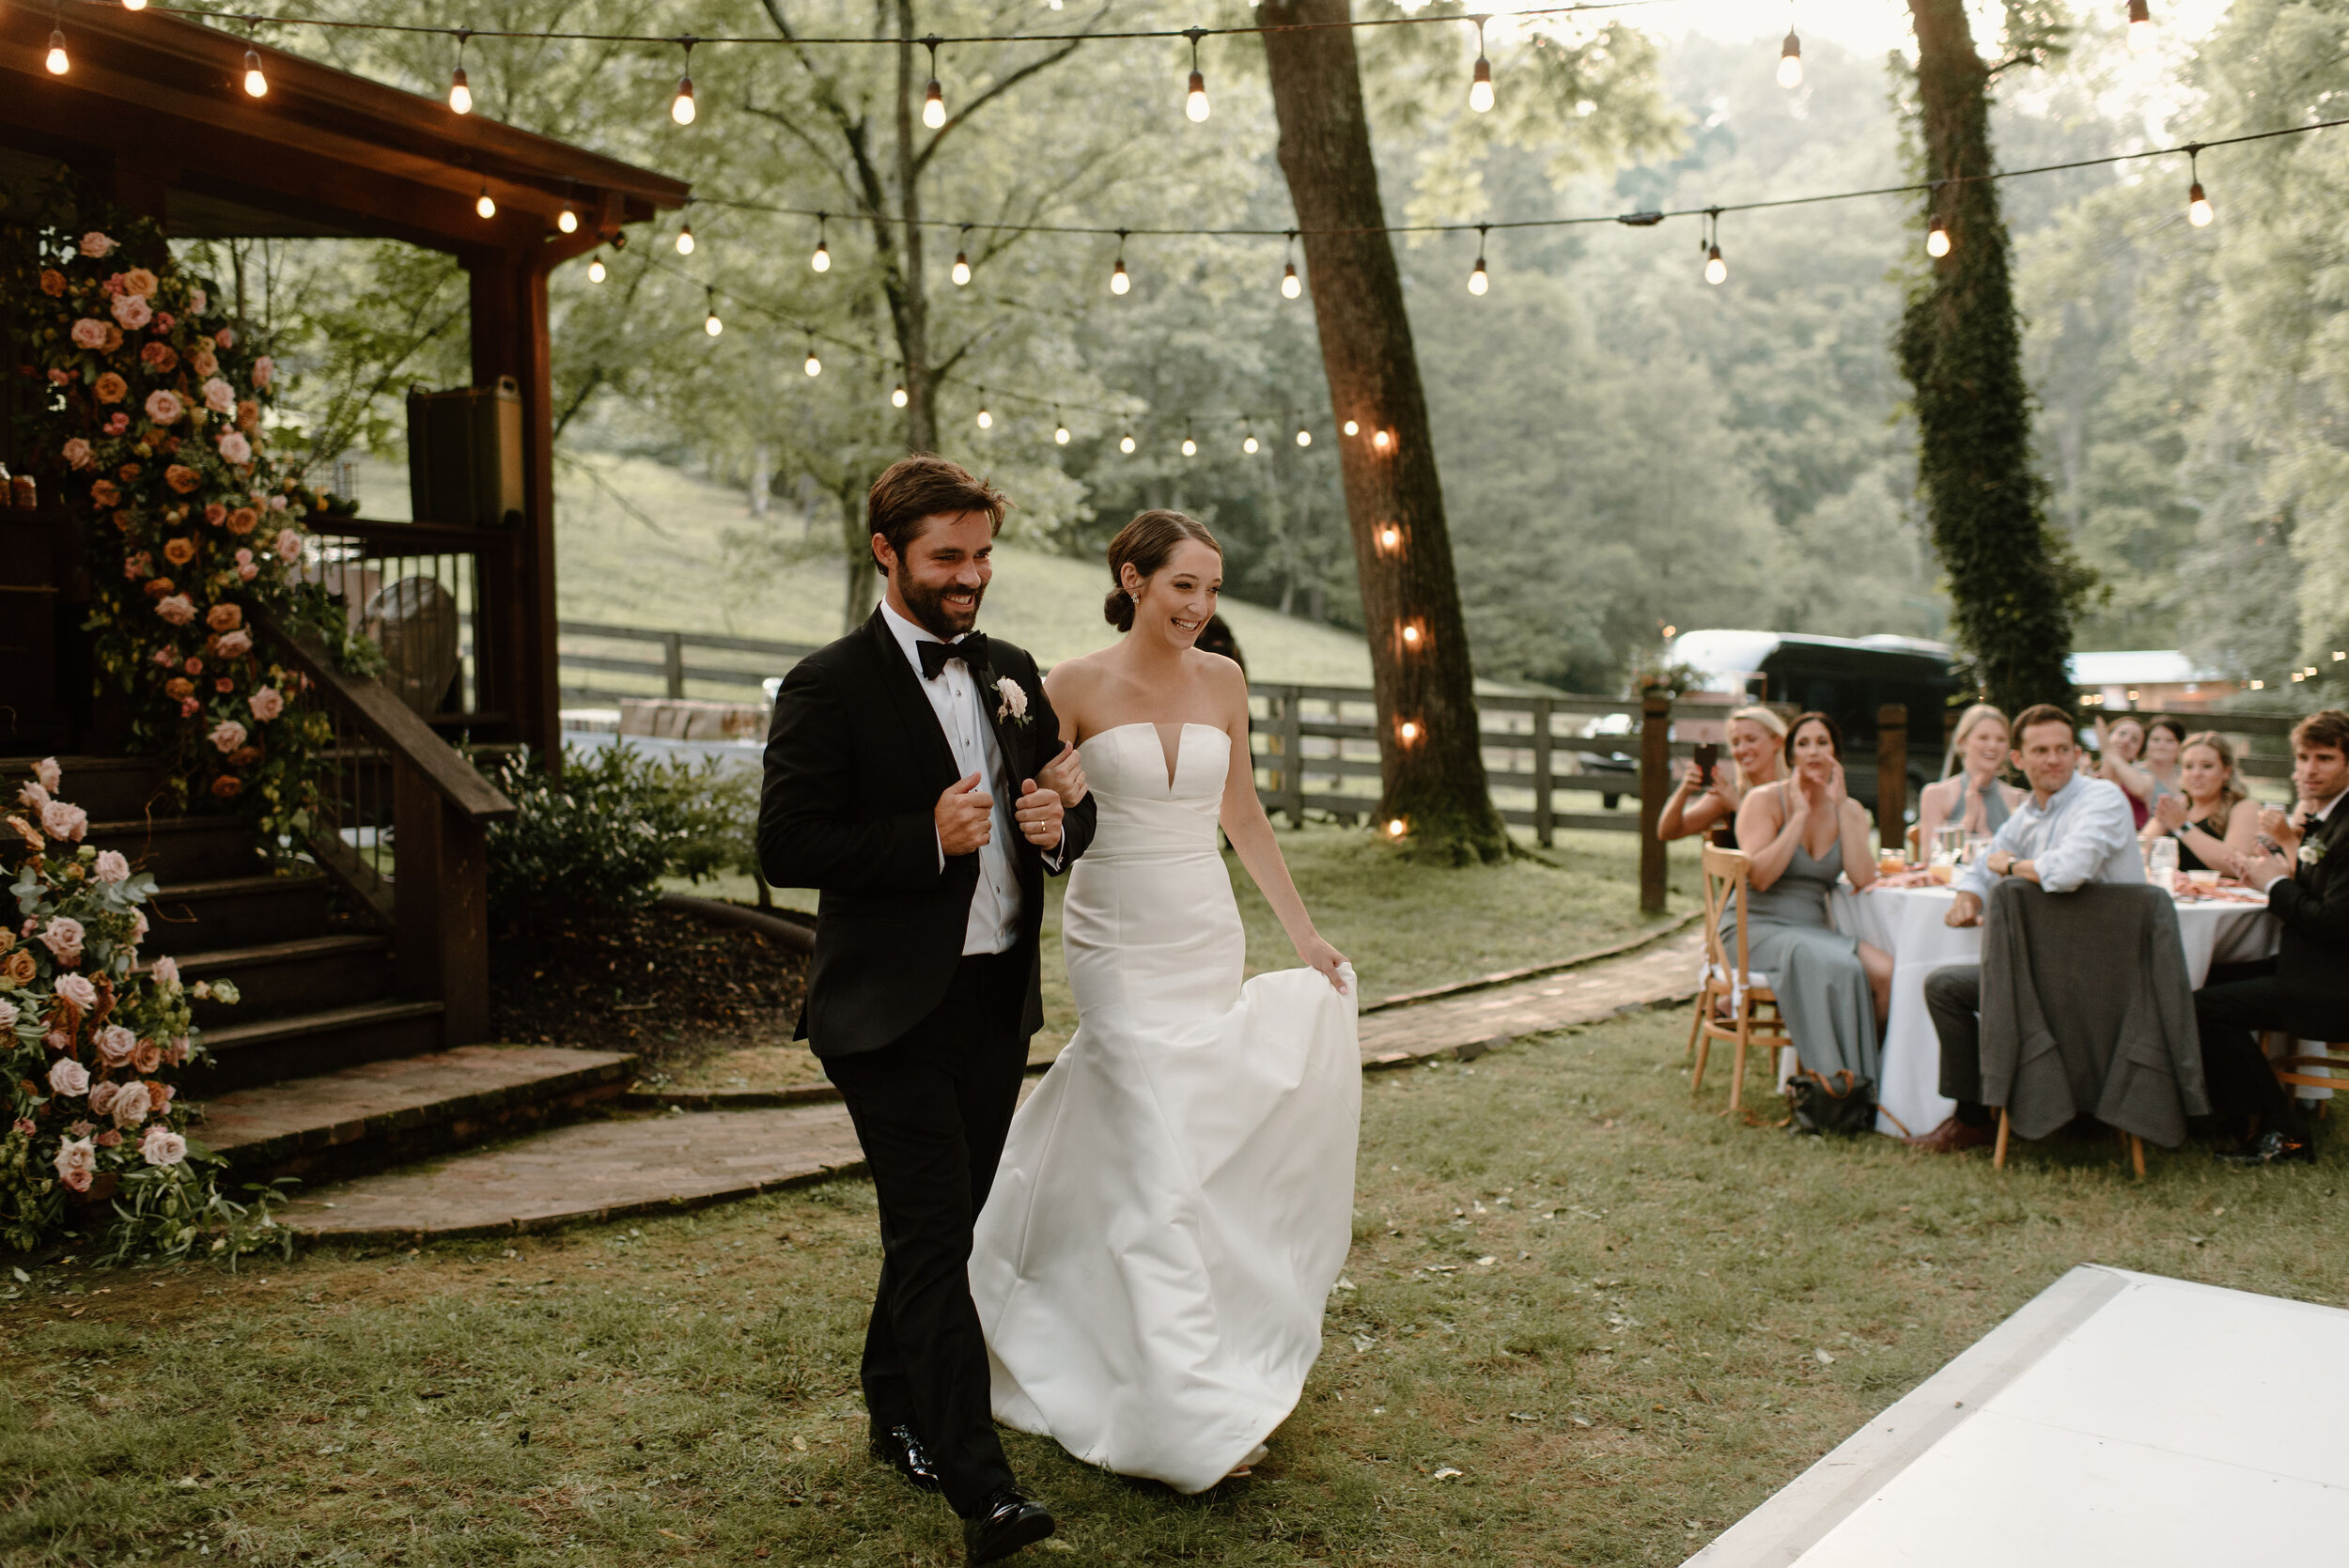 Intimate Blush and Toffee Garden Wedding in Nashville. Floral design by Rosemary and Finch.